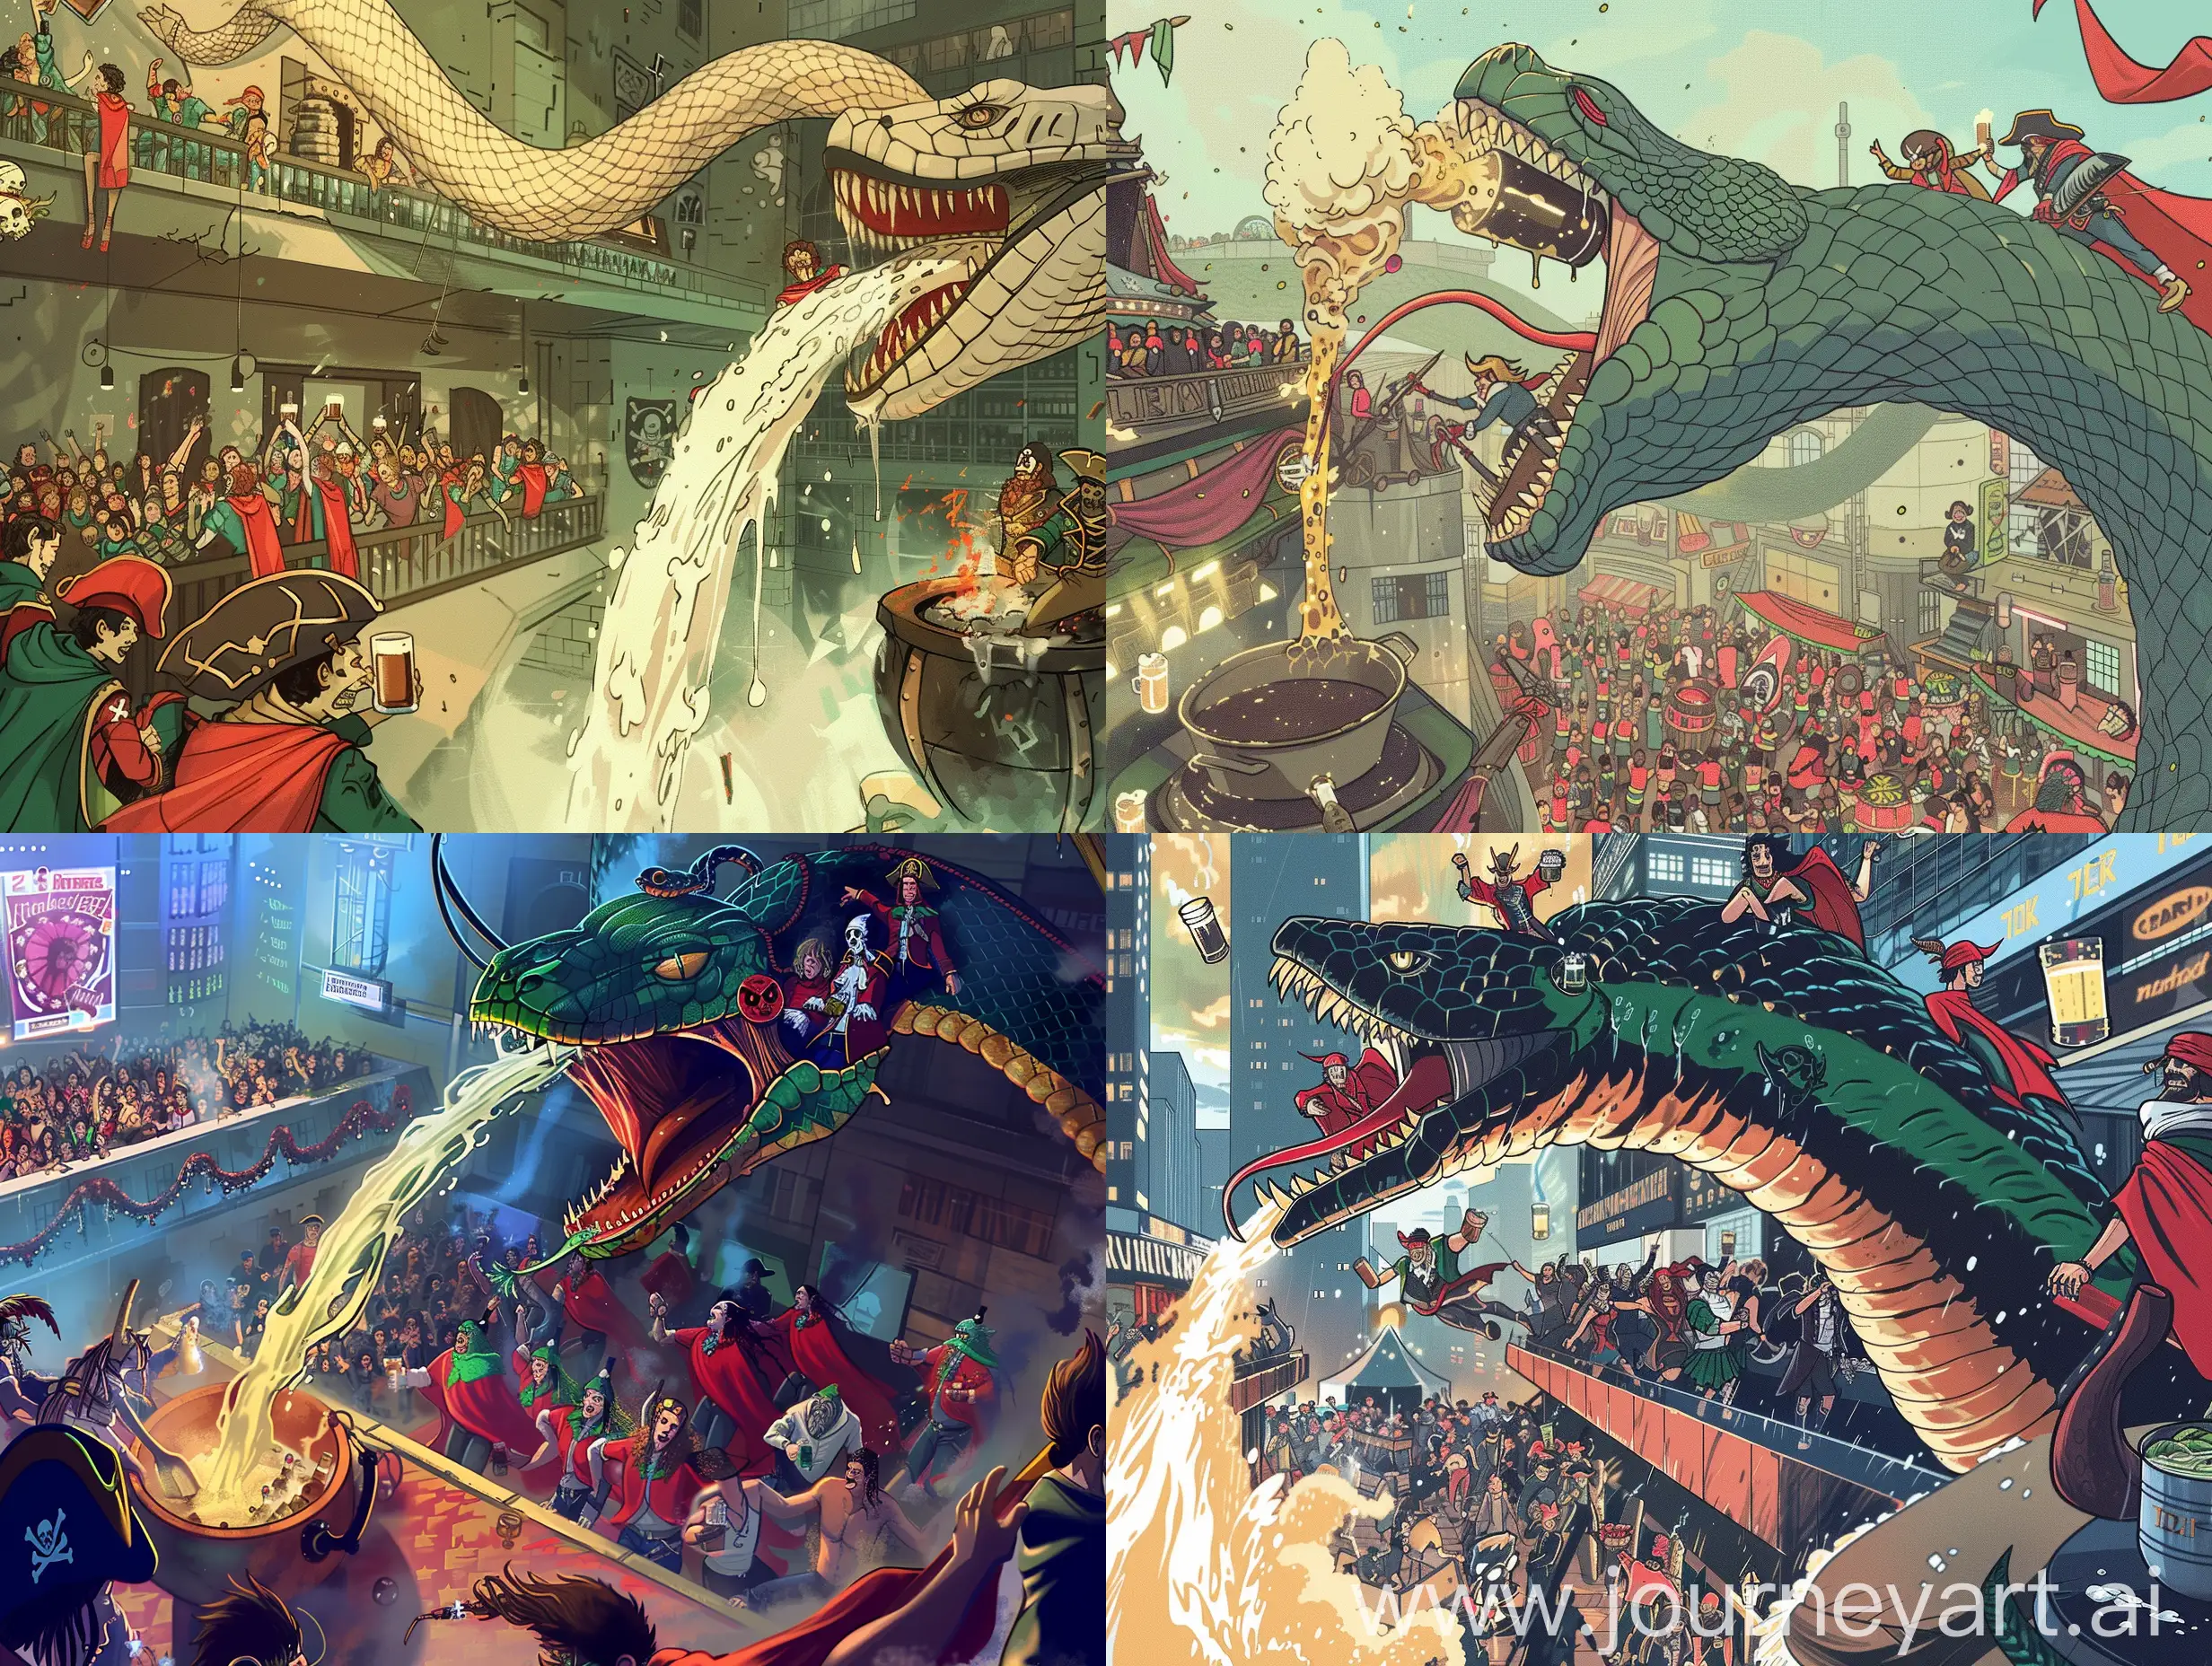 Anime style. I would like an illustration depicting a giant serpent spewing beer onto a crowd of people partying in a modern discotheque. I'd like to see individuals wearing red capes with green trim riding the snake. In one corner of the image, I'd like to have 2 pirates cooking a mysterious concoction in a cauldron. 